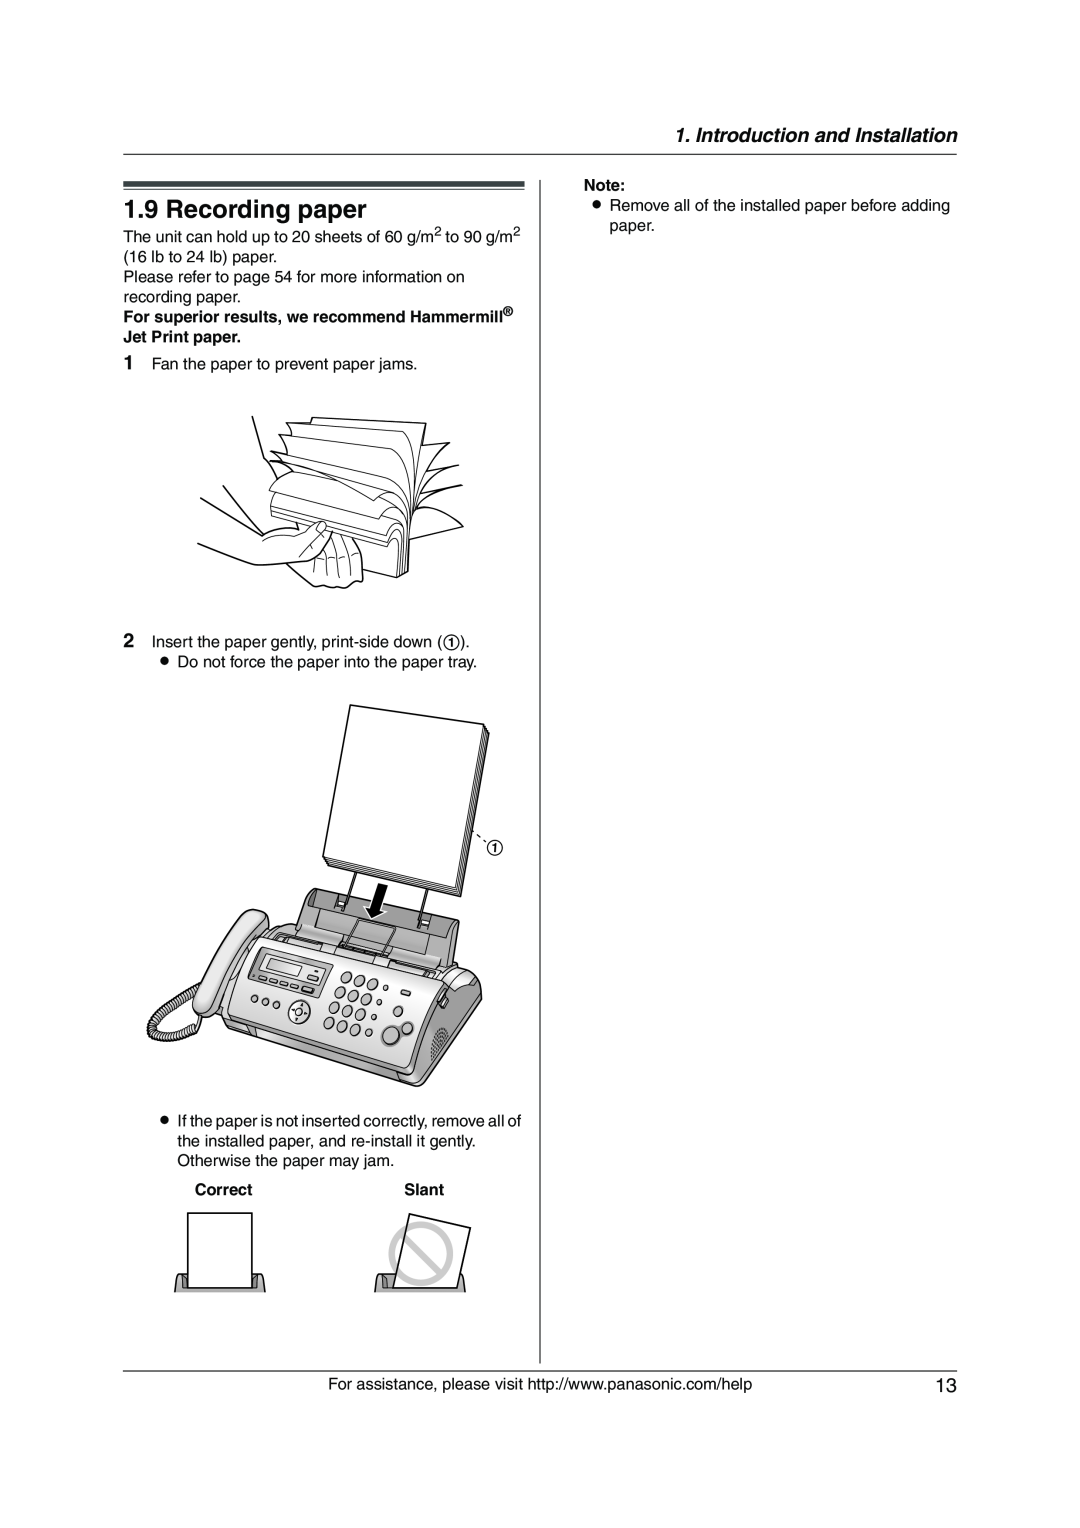 Panasonic KX-FP215 operating instructions Recording paper, Introduction and Installation, CorrectSlant 